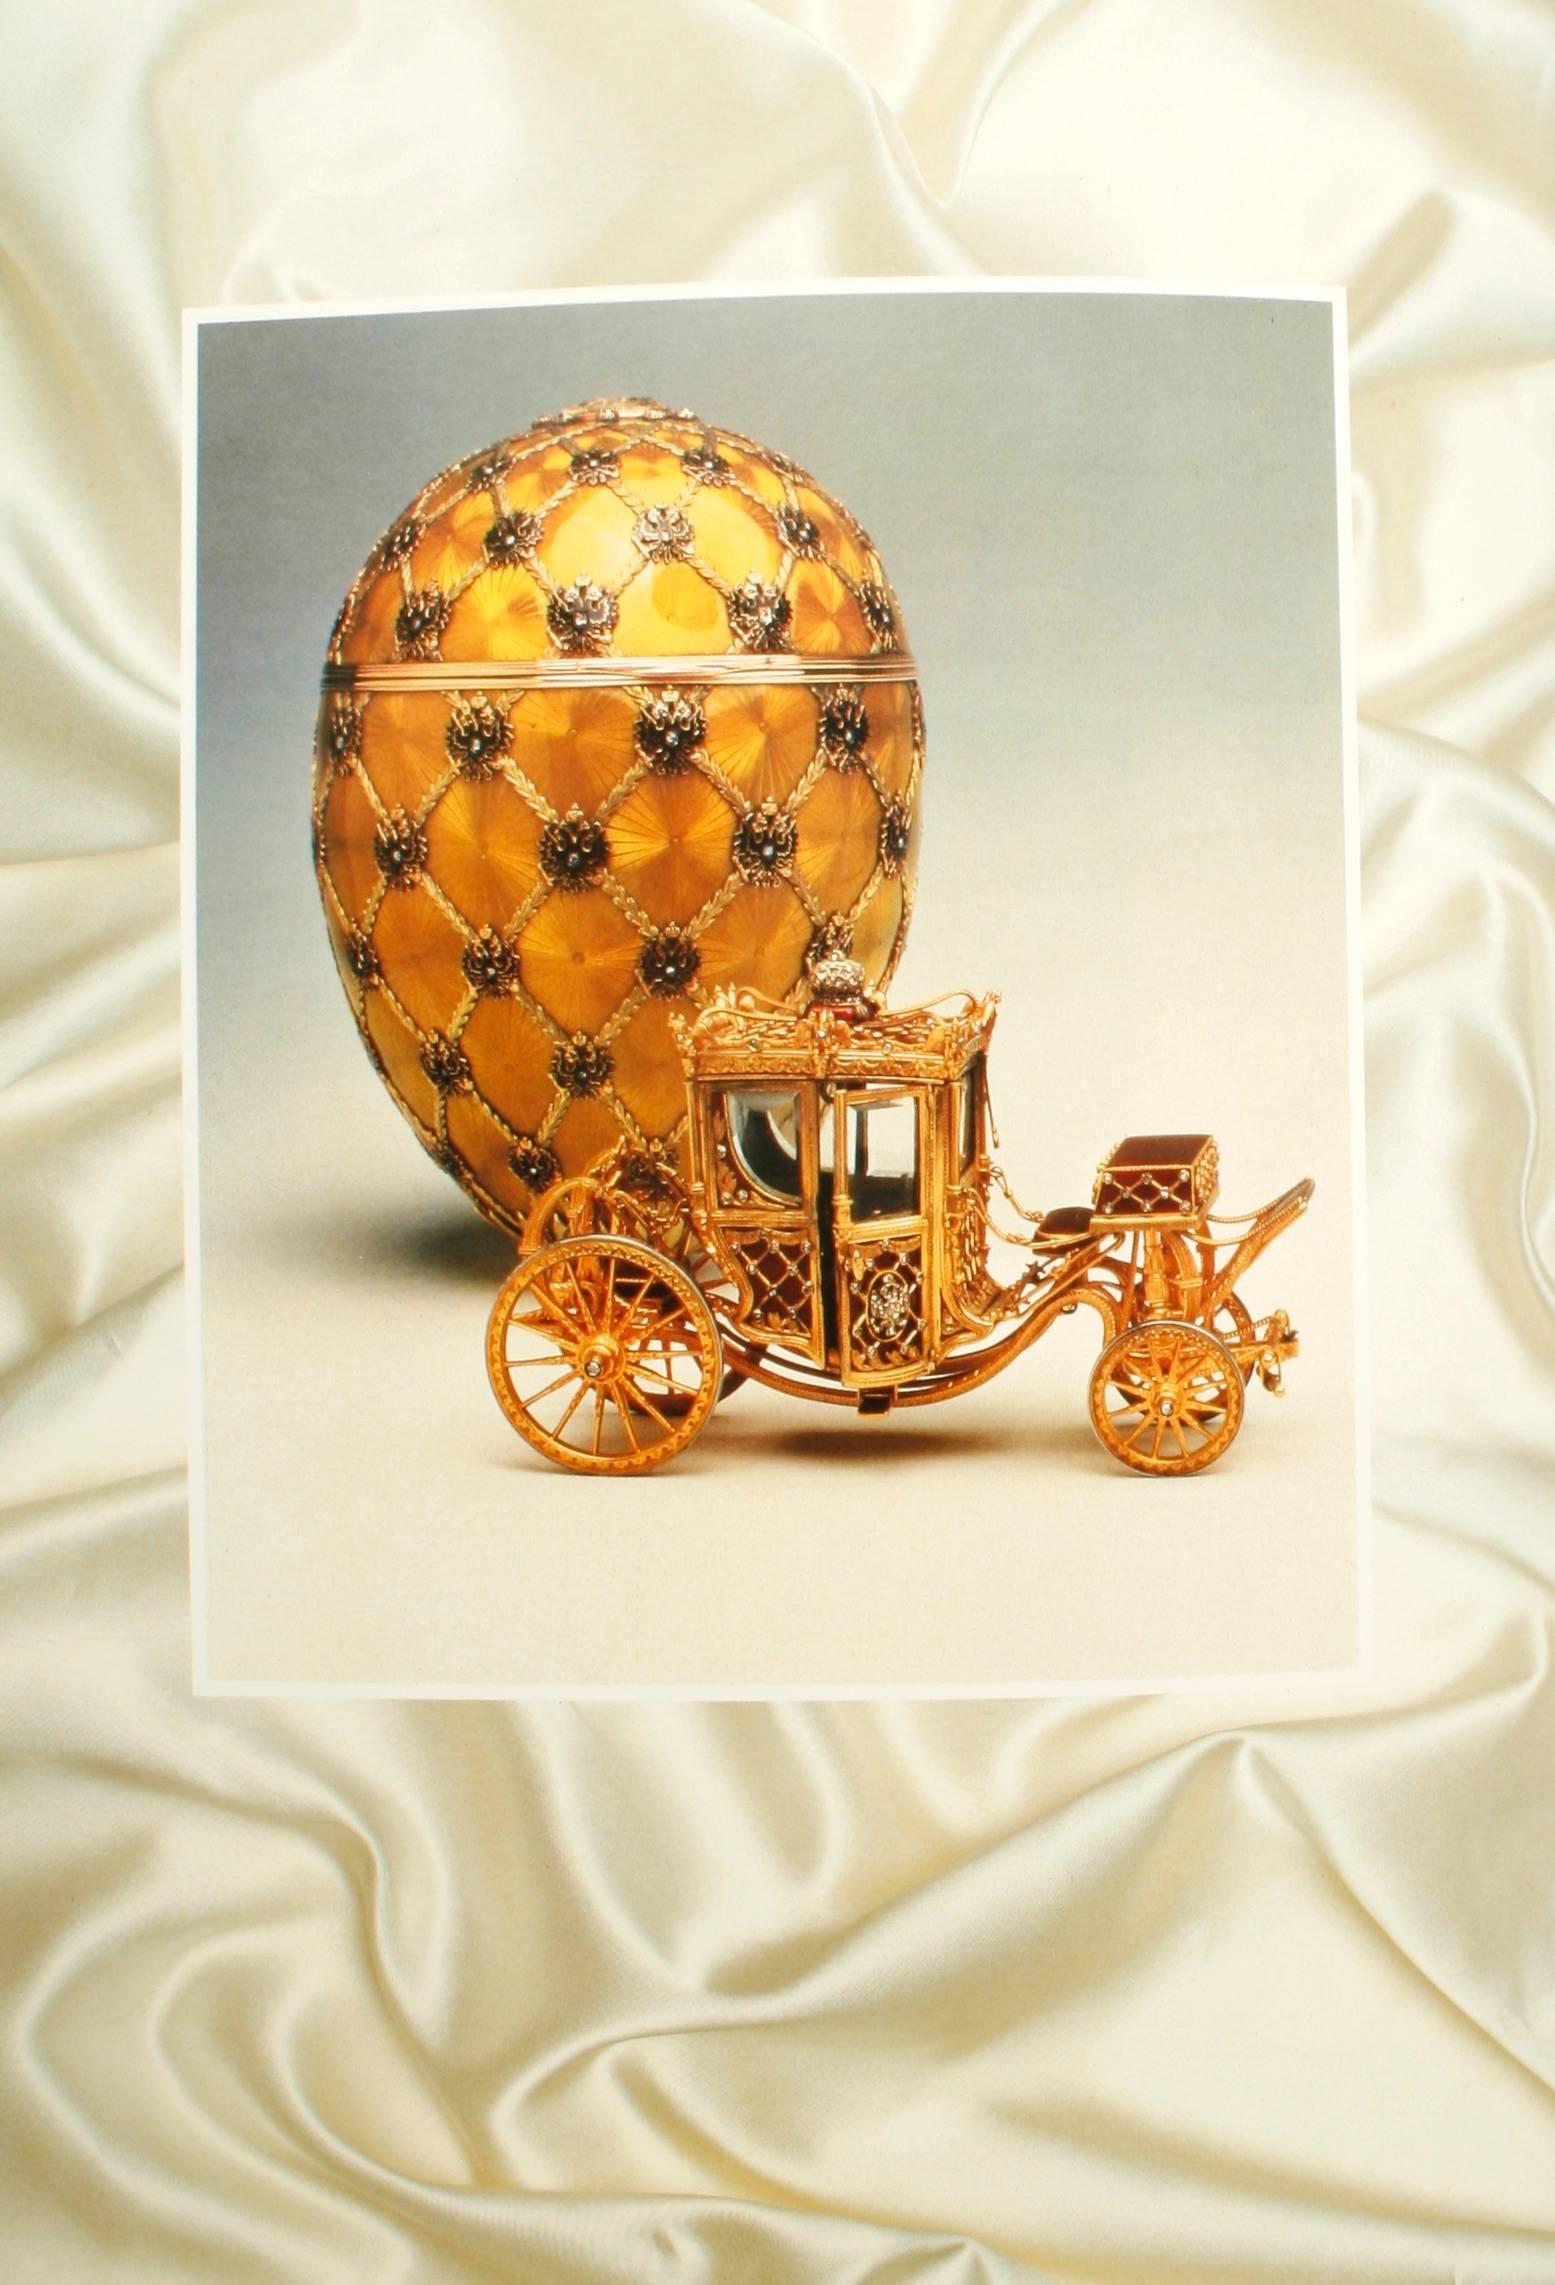 Art of Fabergé by John Booth, First Edition 1